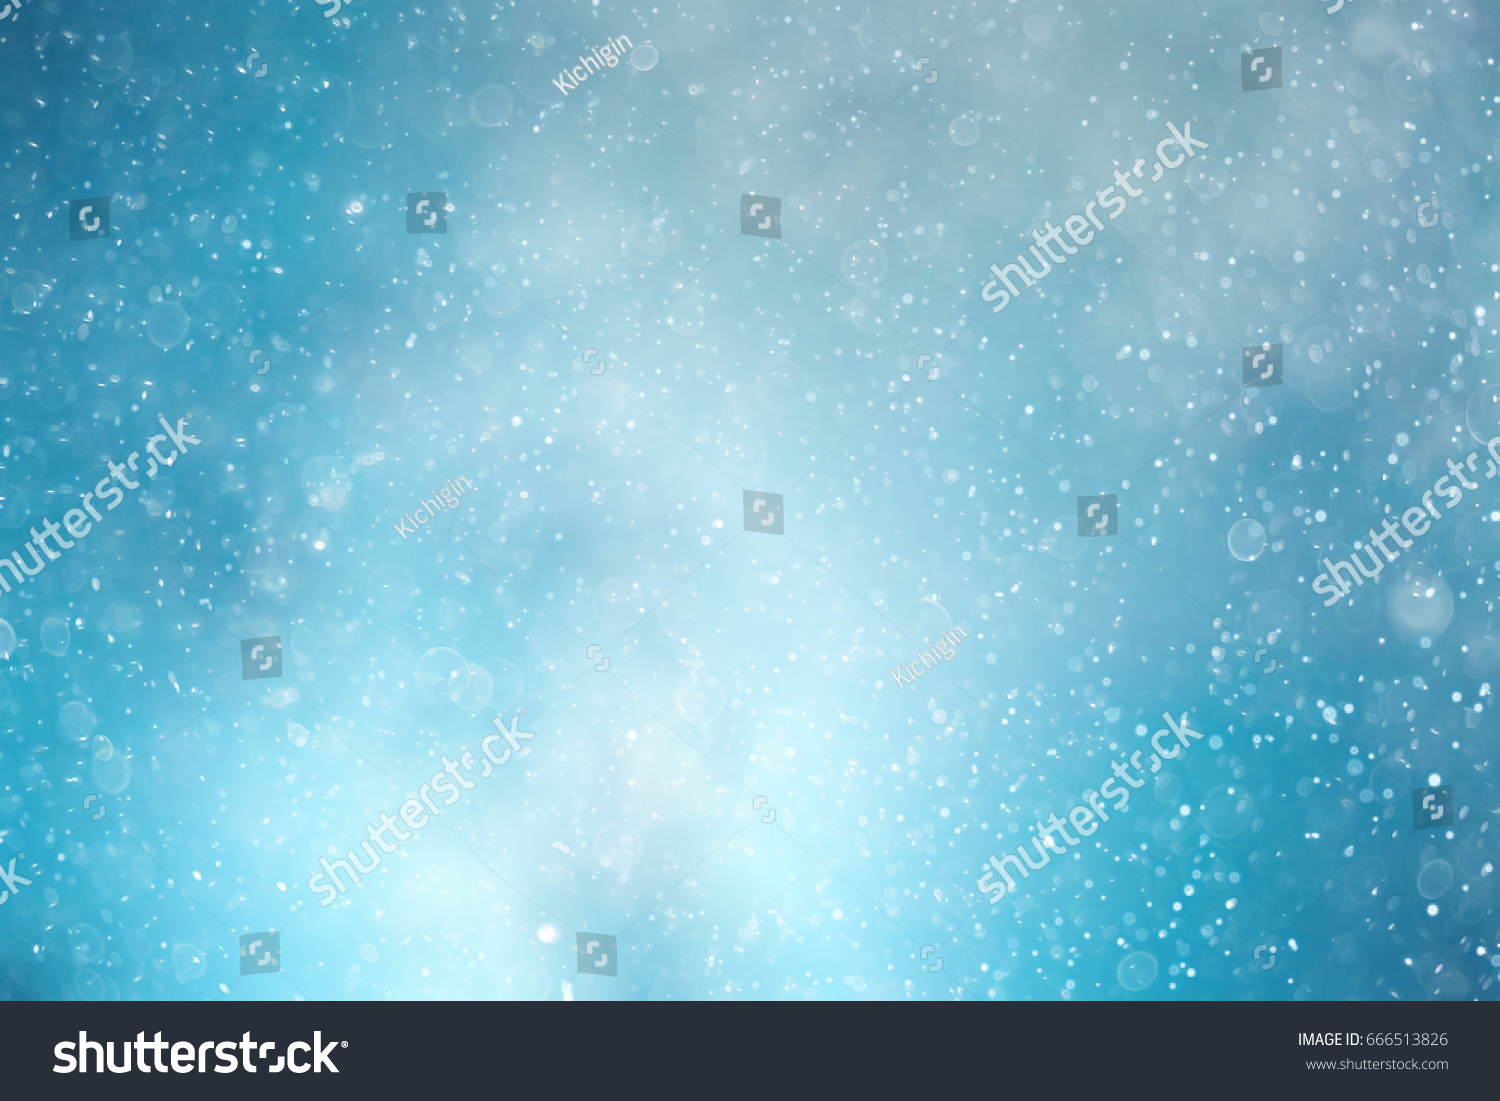 Snowfall texture of snowflakes on blurry background design weather #666513826